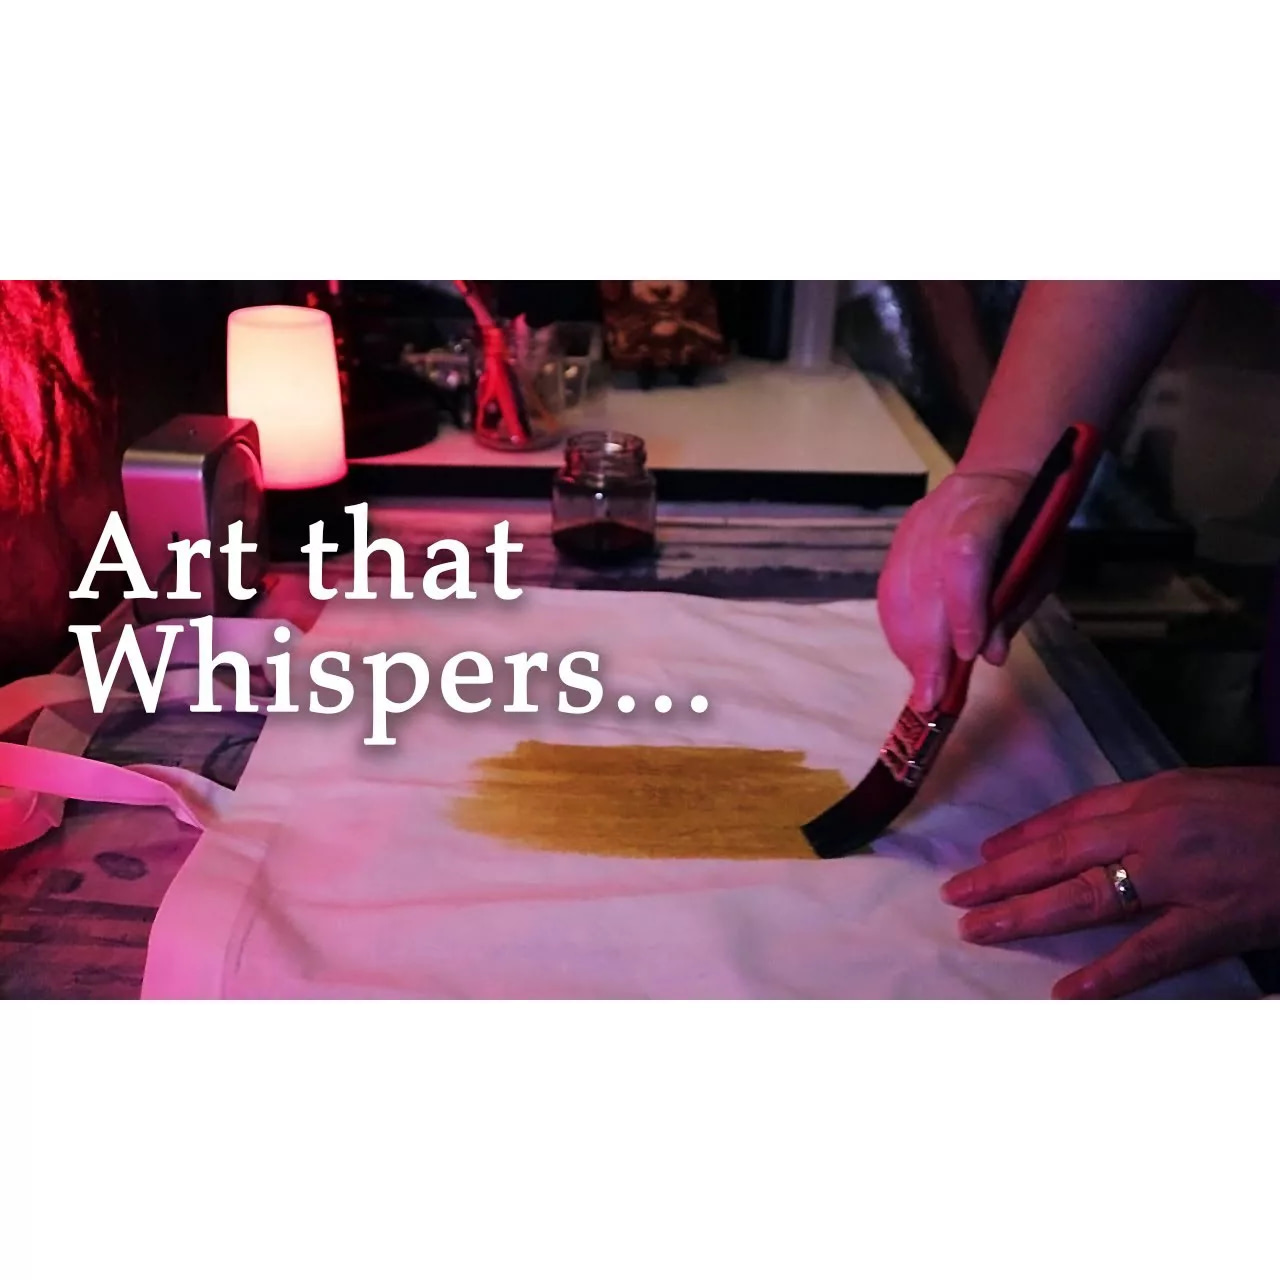 Art that Whispers - YouTube Video by Photographic Alchemi